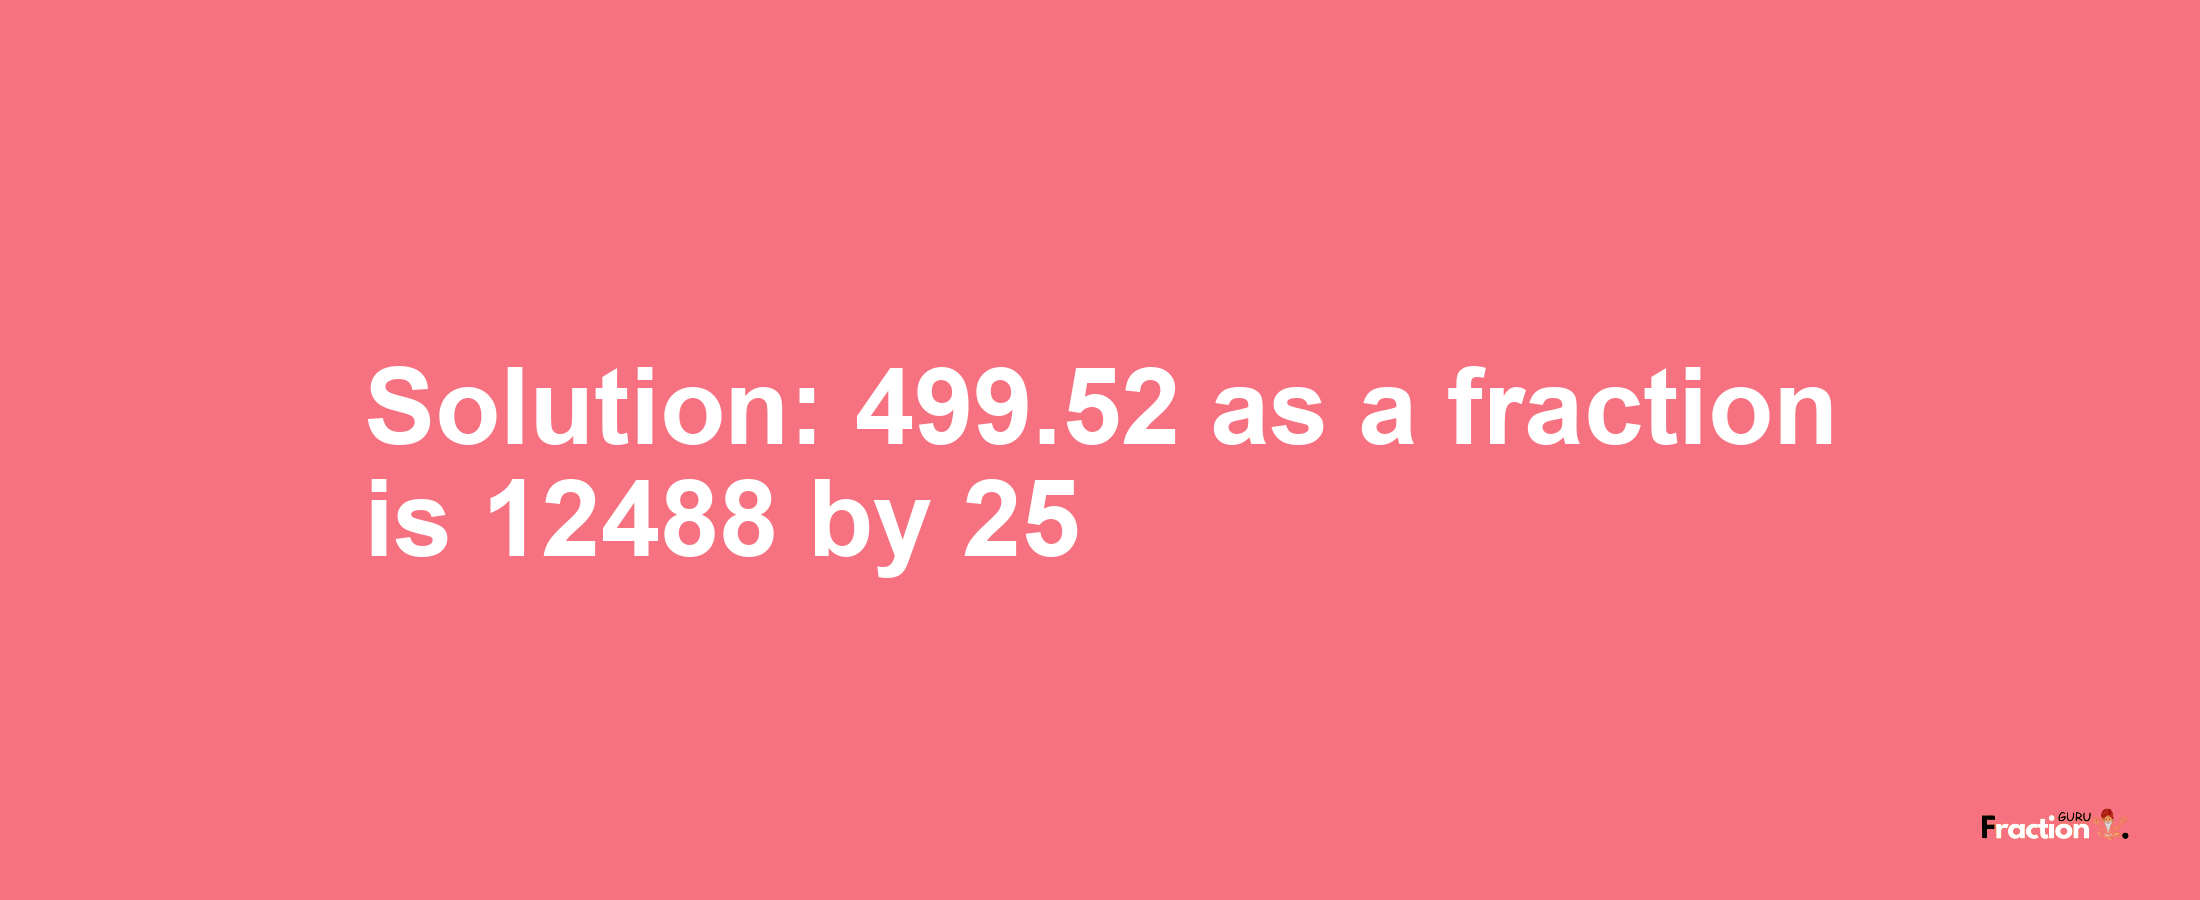 Solution:499.52 as a fraction is 12488/25